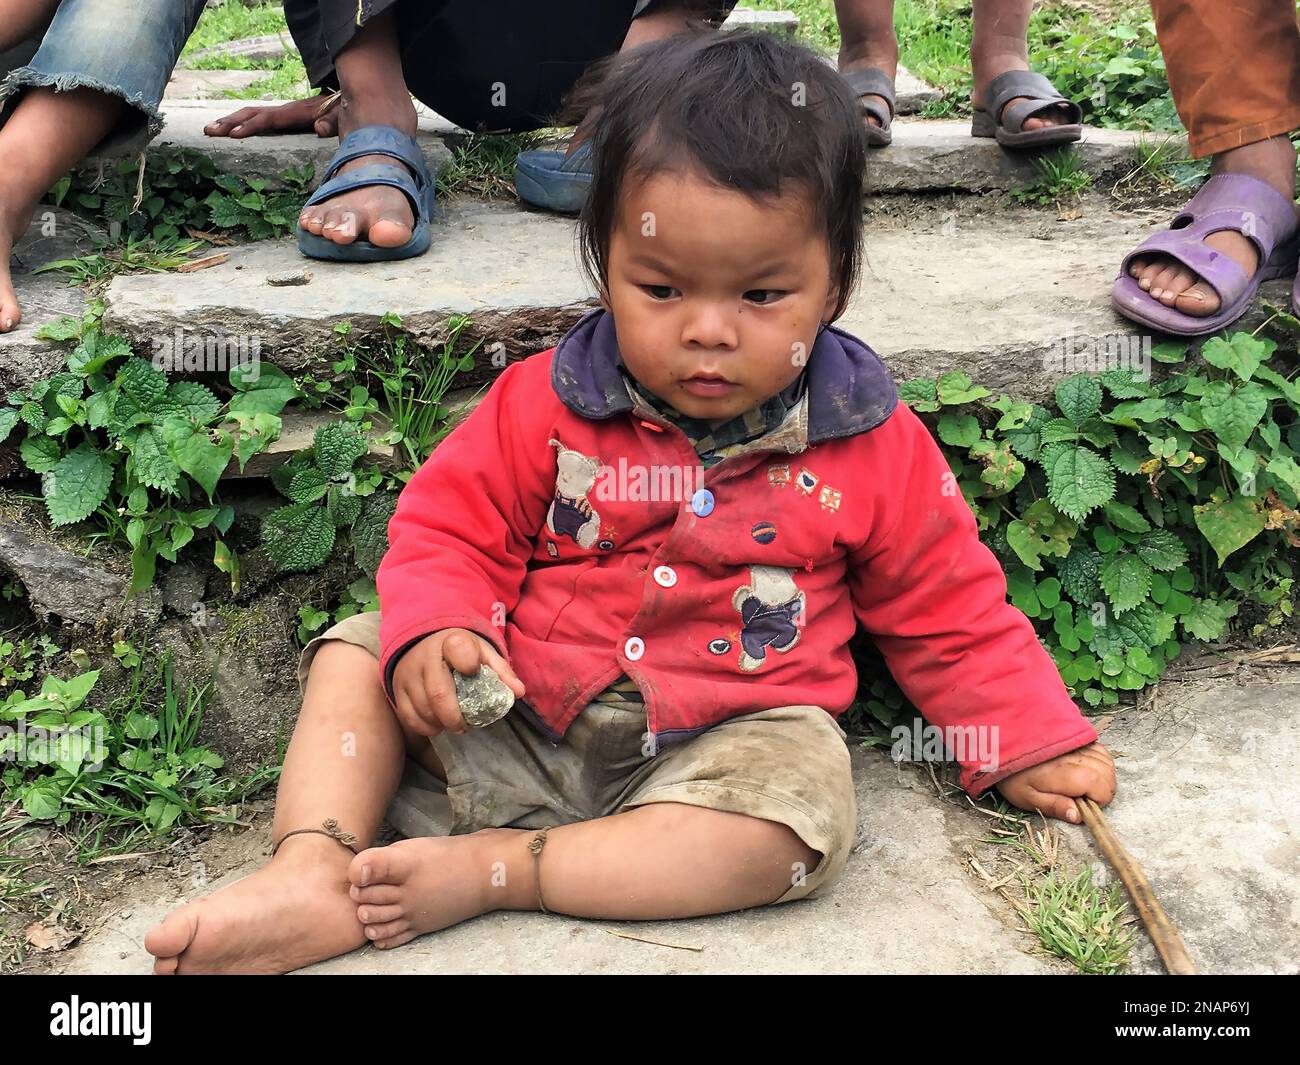 Ghorepani, Nepal,October 11th 2016 - A Nepali child in the middle of his play time near the village of Ghorepani on the Annapurna Circuit trek Stock Photo